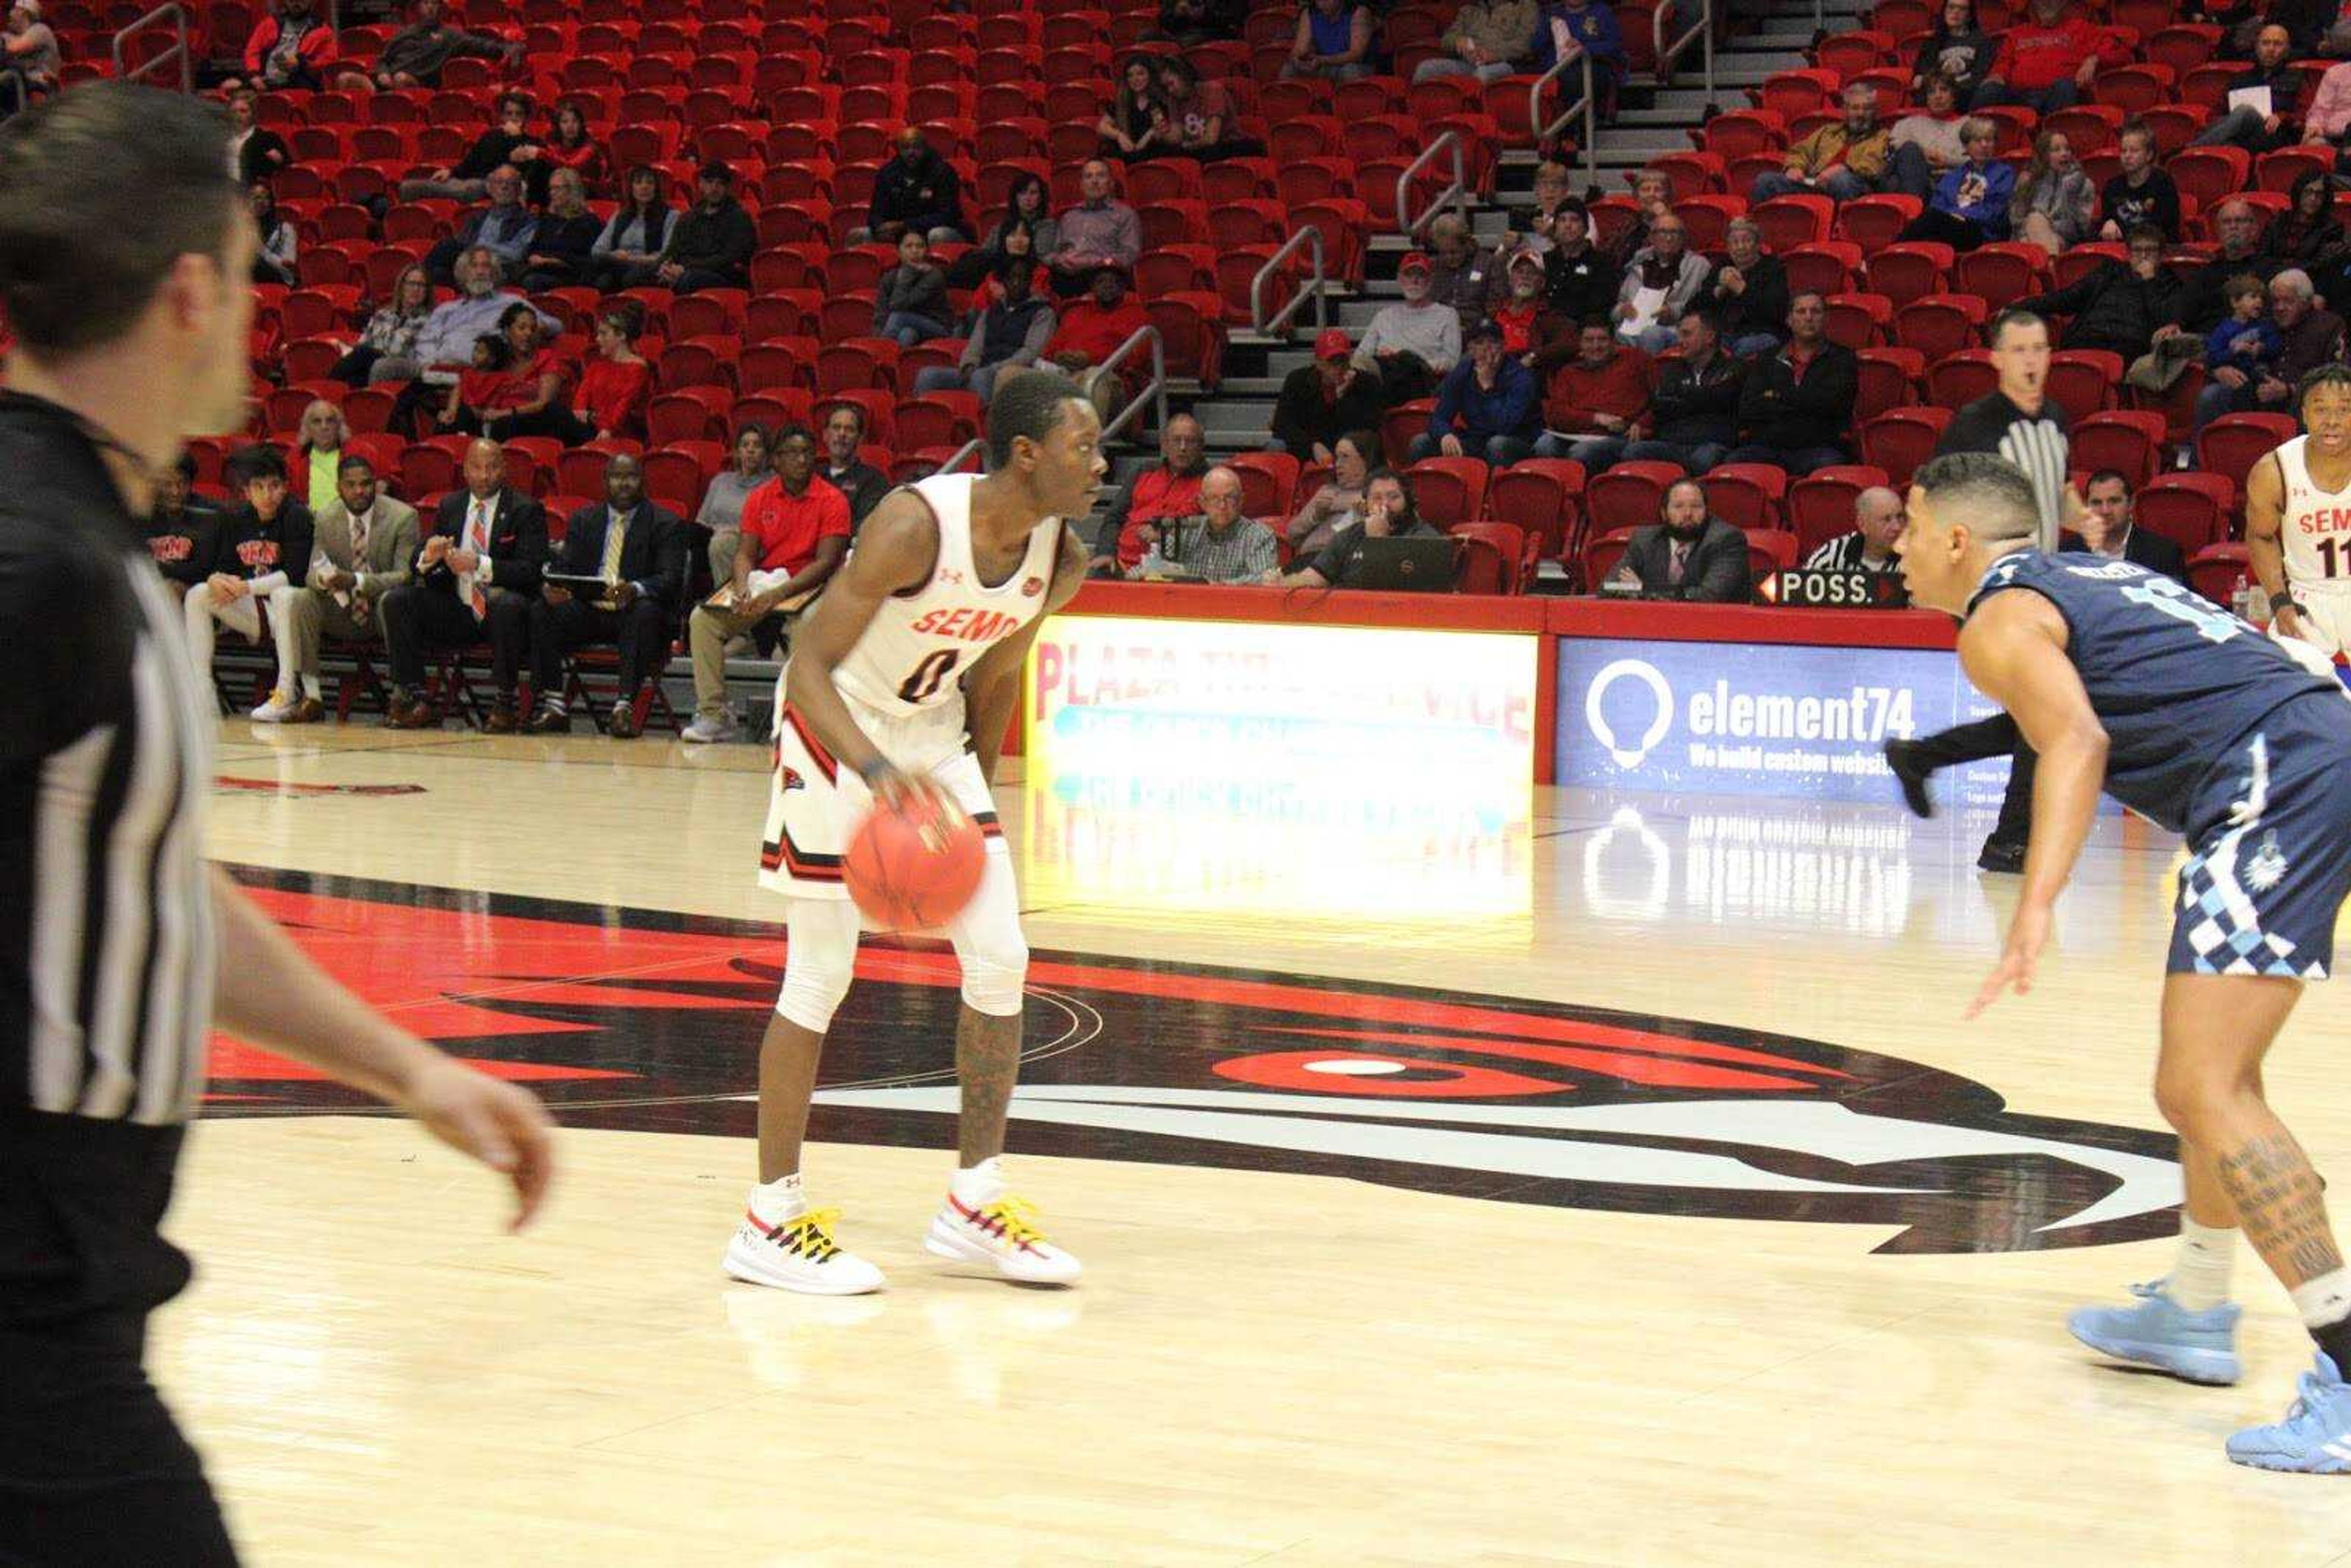 Sophomore guard Alex Caldwell dribbles up the court against Citadel on Nov. 20 at the Show Me Center.